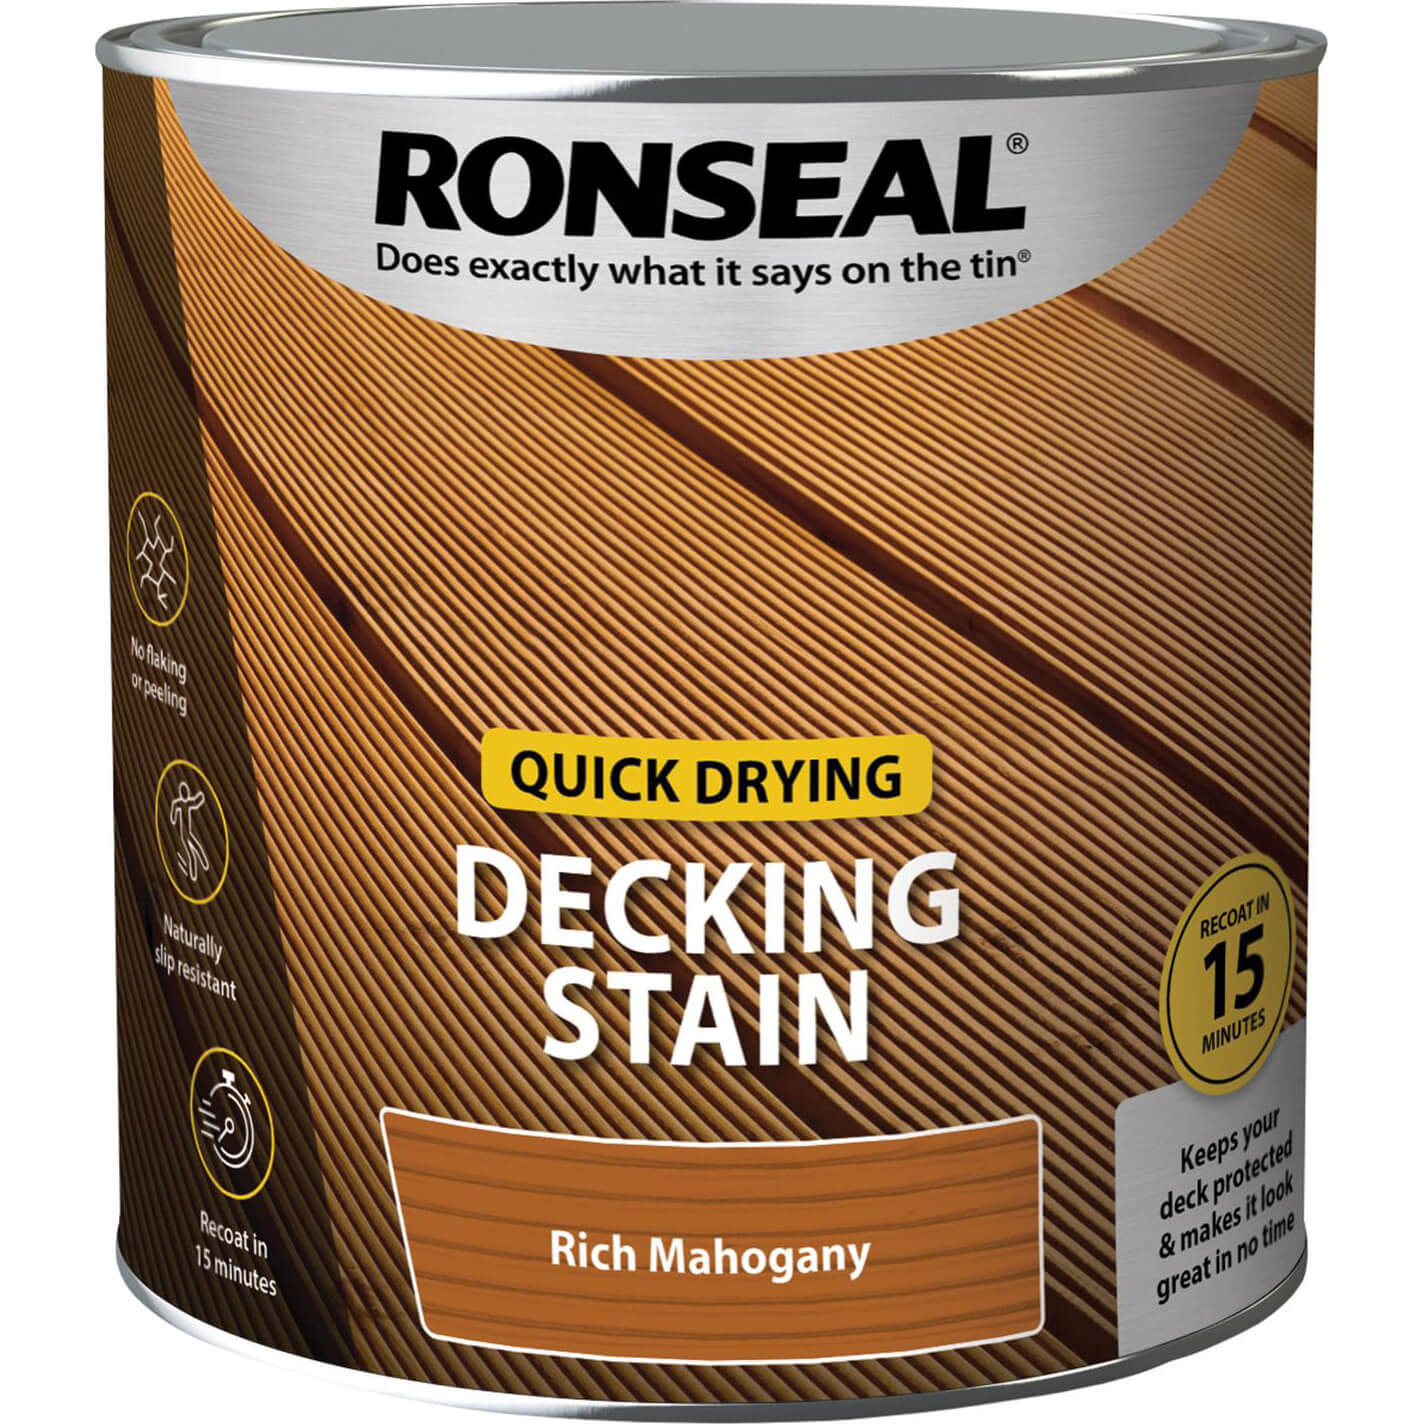 Image of Ronseal Quick Drying Decking Stain 2.5l Rich Mahogany